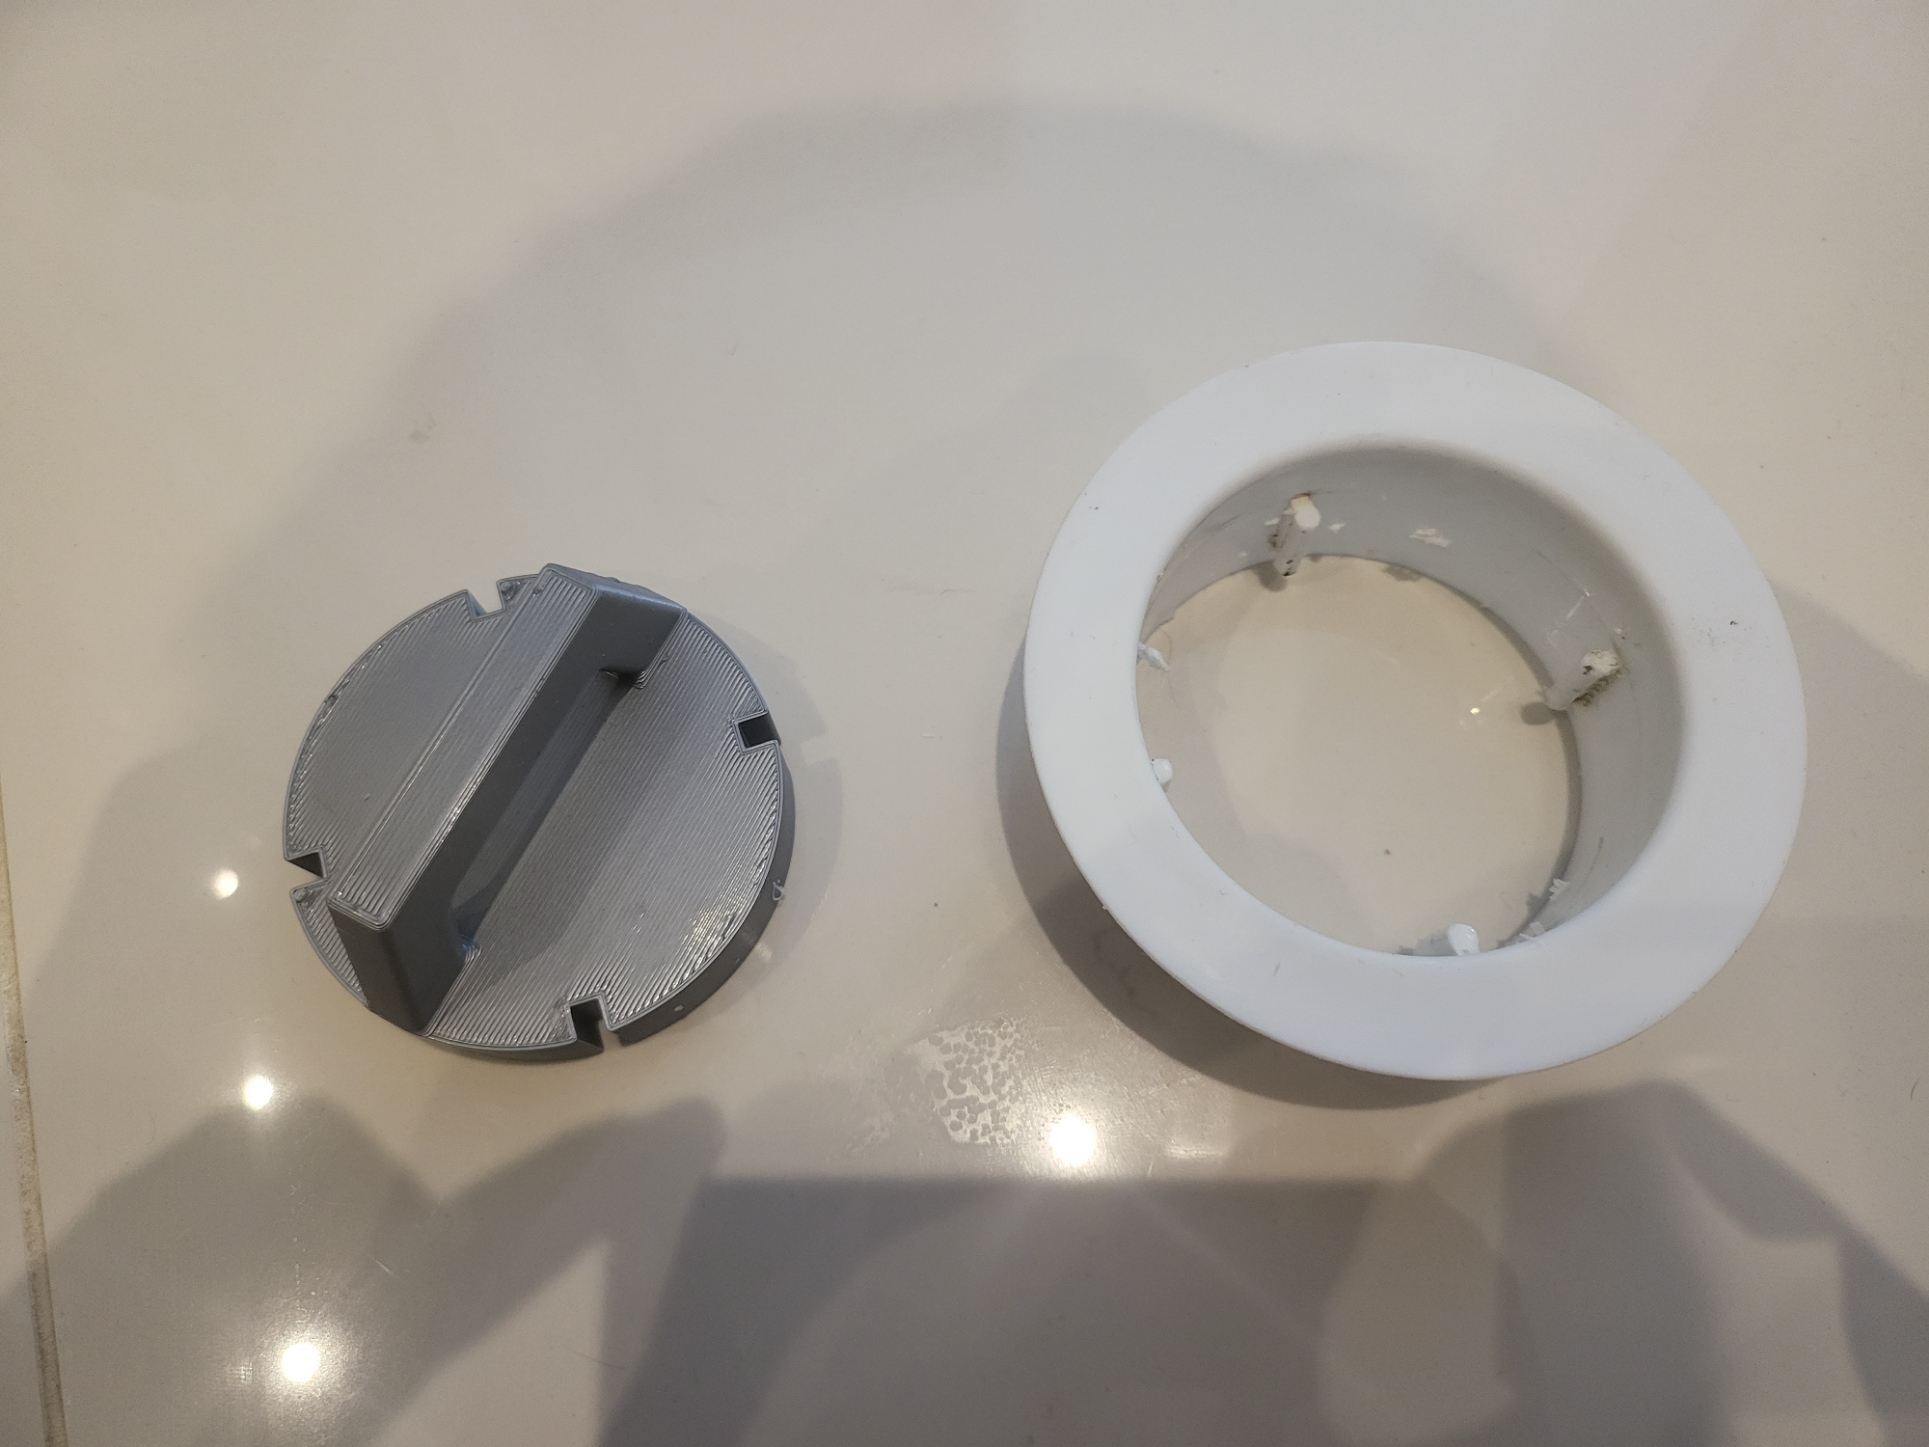 Shower tray waste removal tool